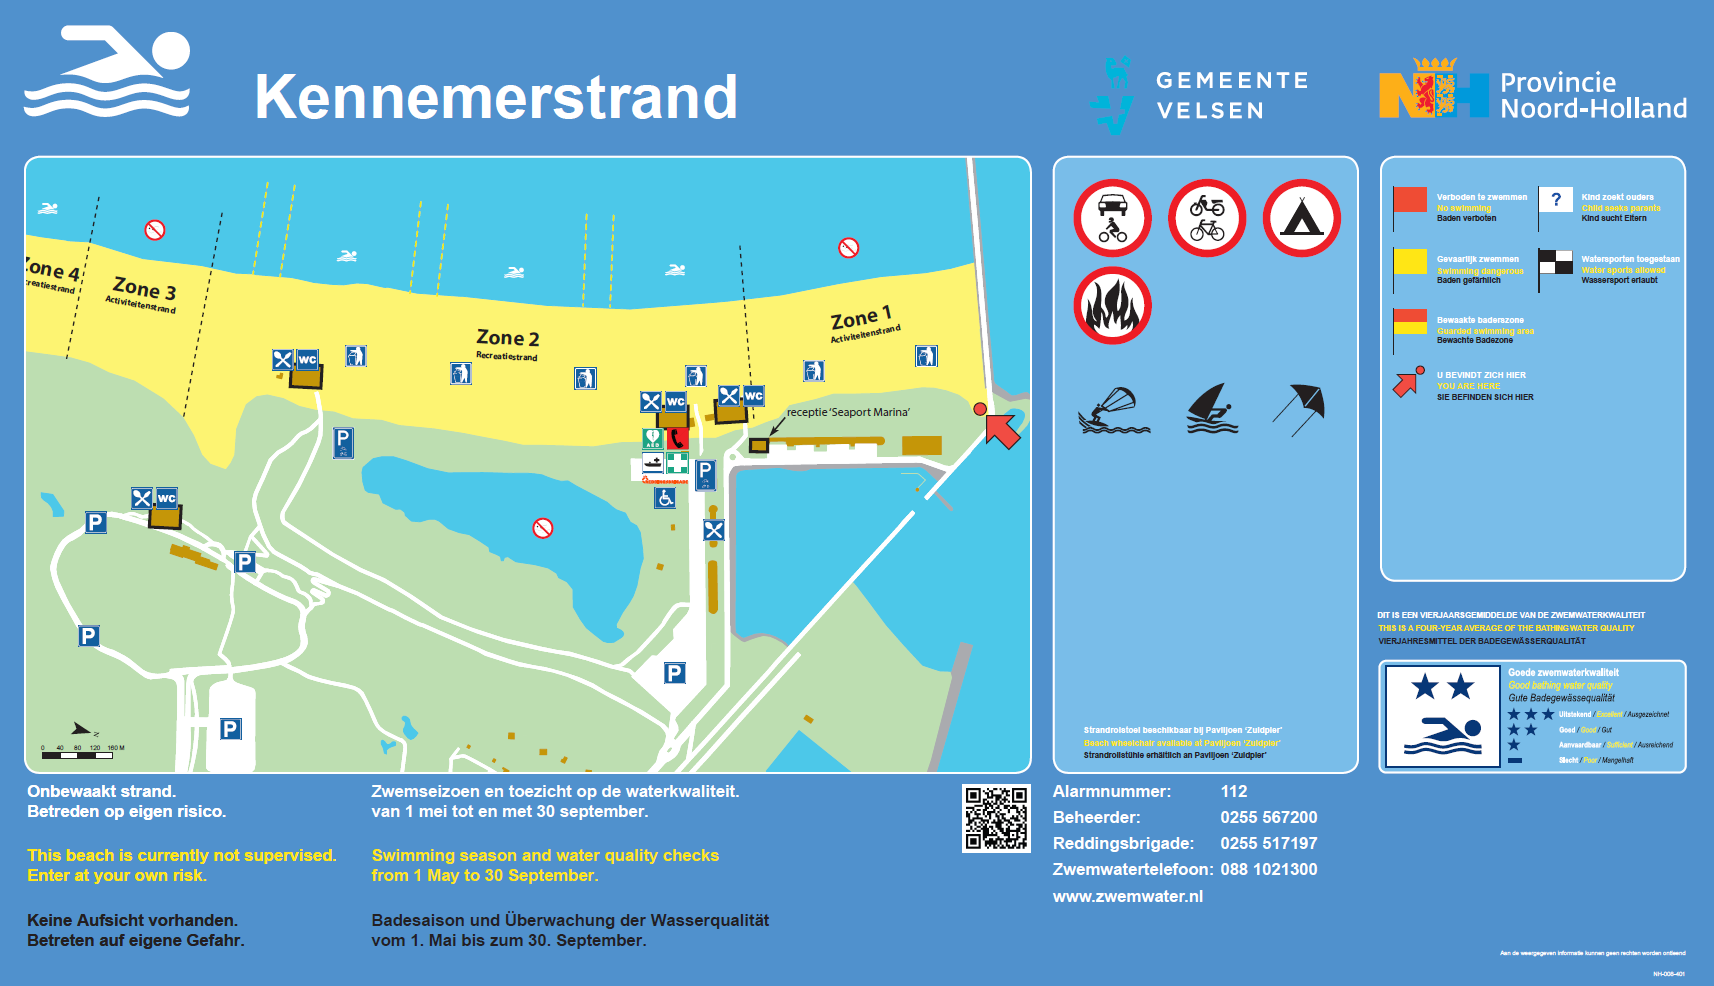 The information board at the swimming location Kennemerstrand